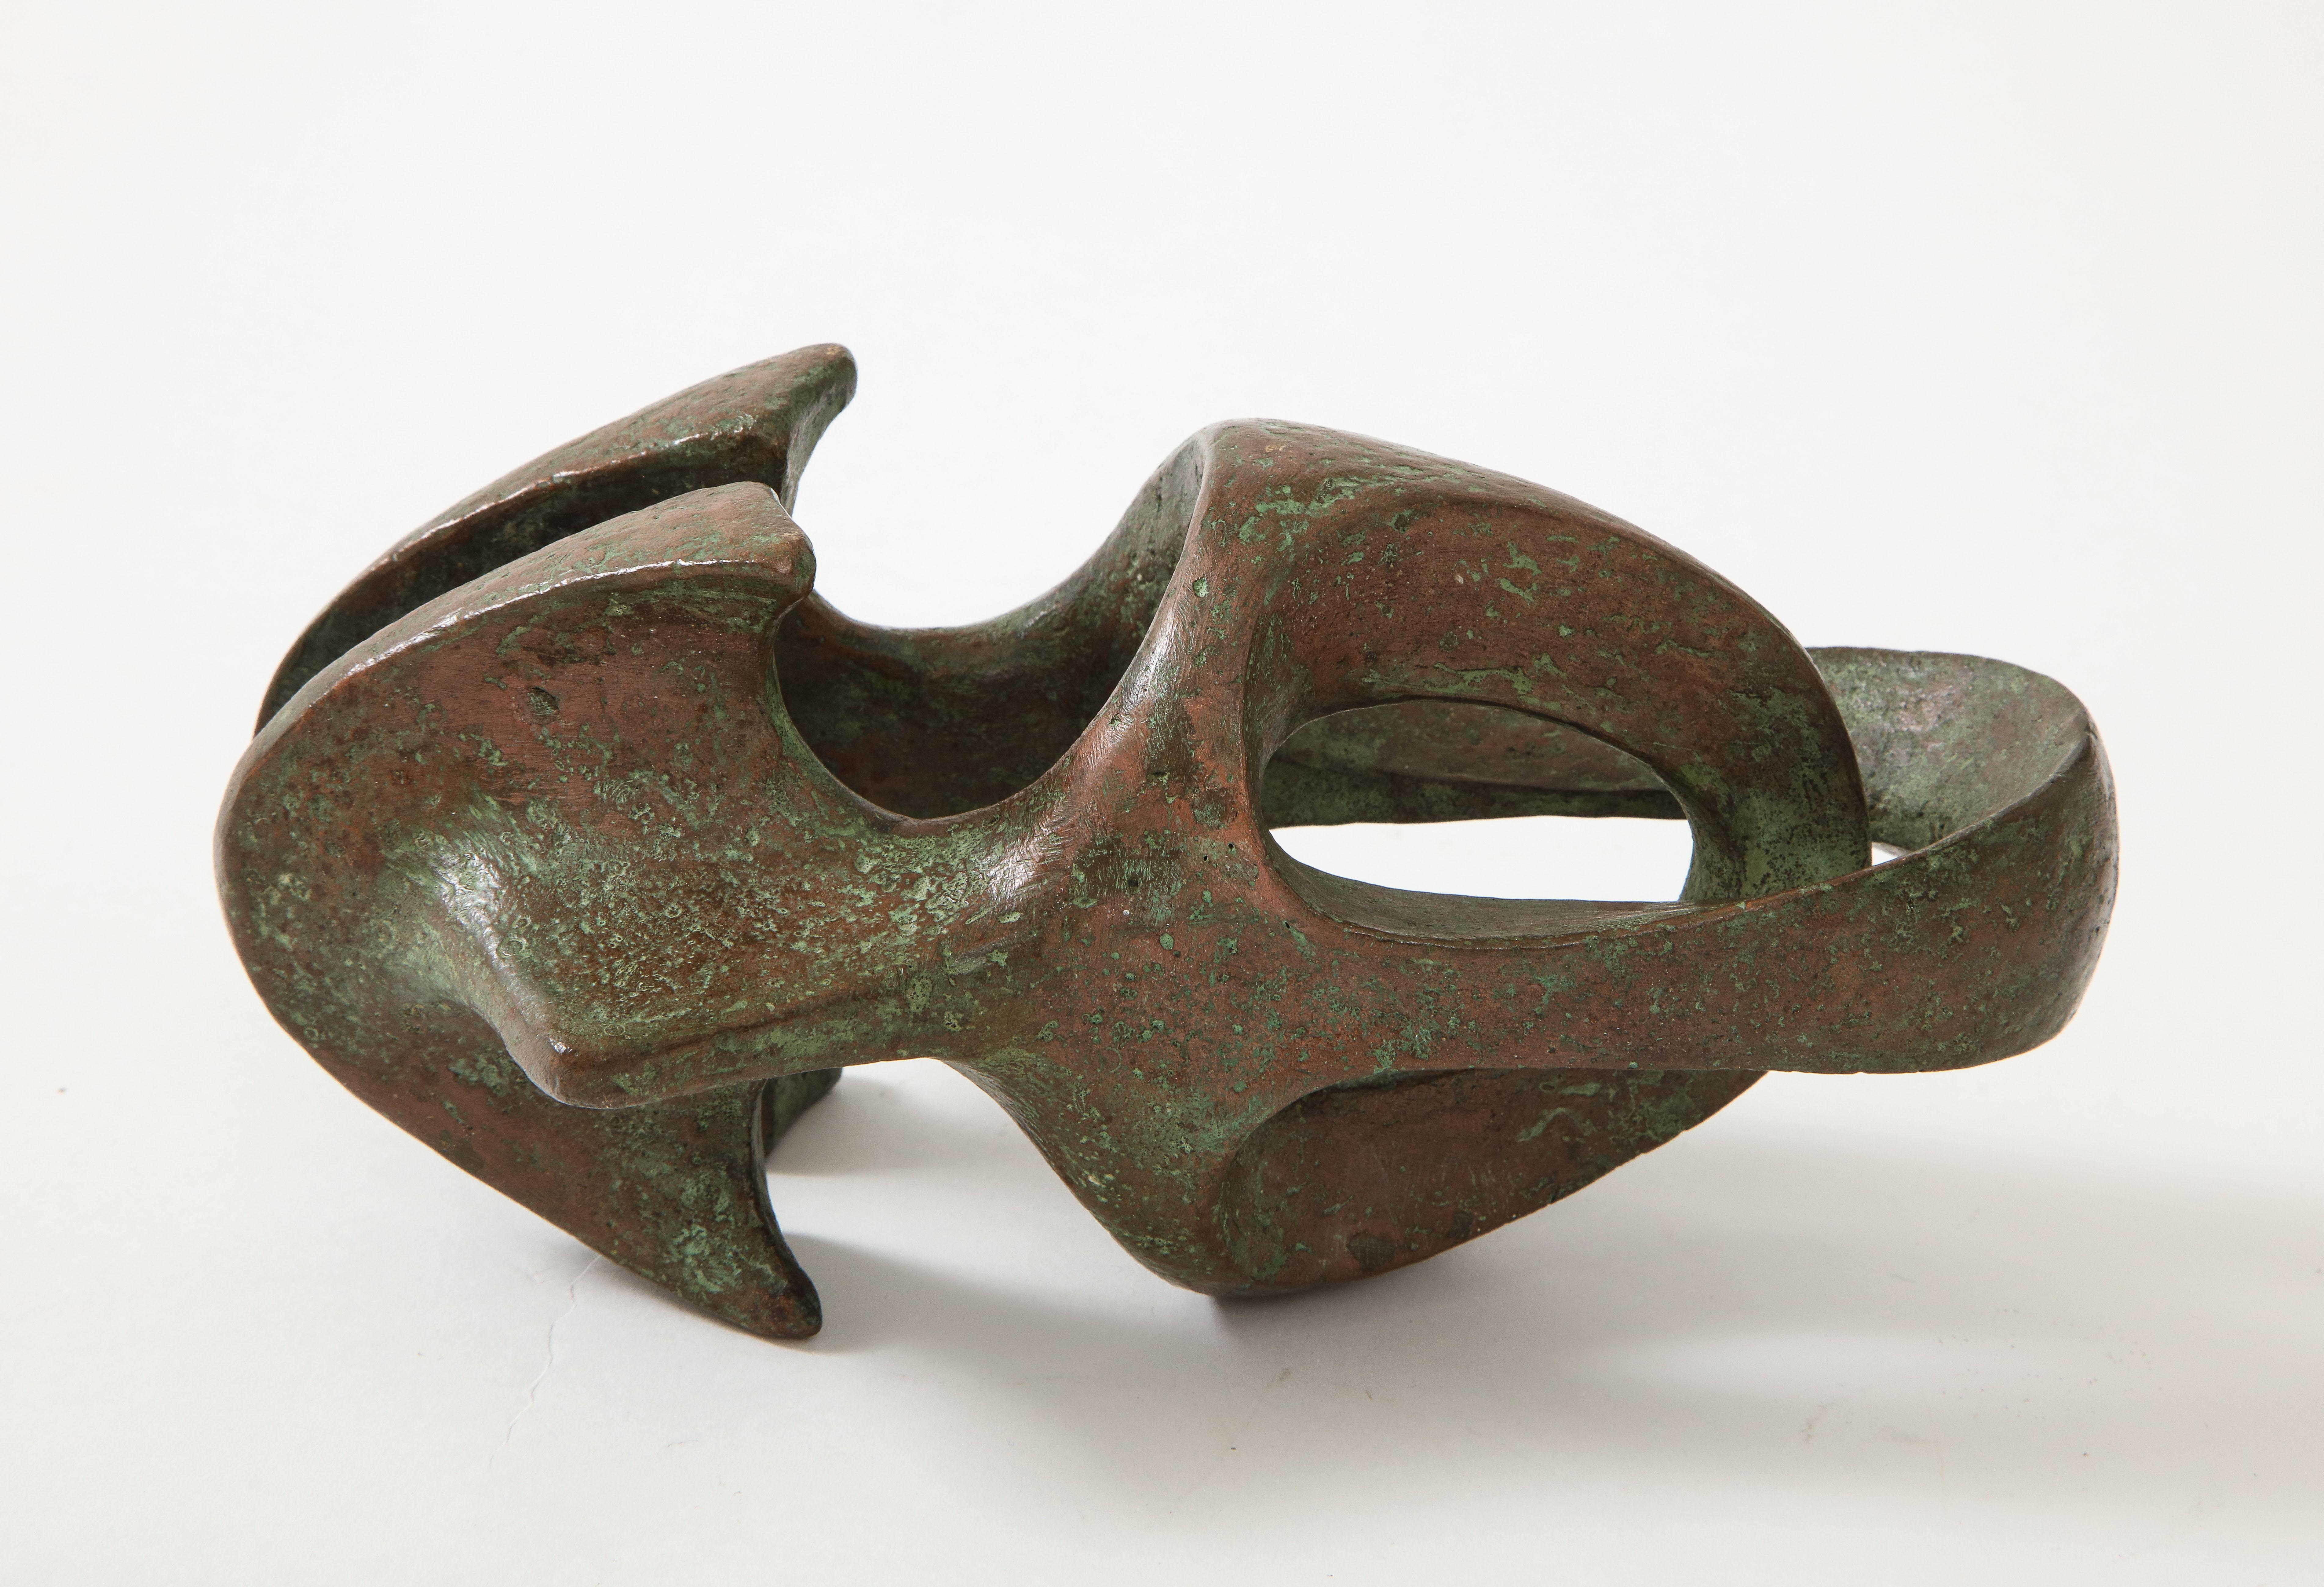 Untitled, circa 1965 (Netherlands), signed: ’NEYTS’

Solid bronze (excellent condition, verdigris)

Sjef Neyts (Nuenen 1923-2014) worked as a model maker at George Pal's film studio that made animation and advertising films for Philips. He took